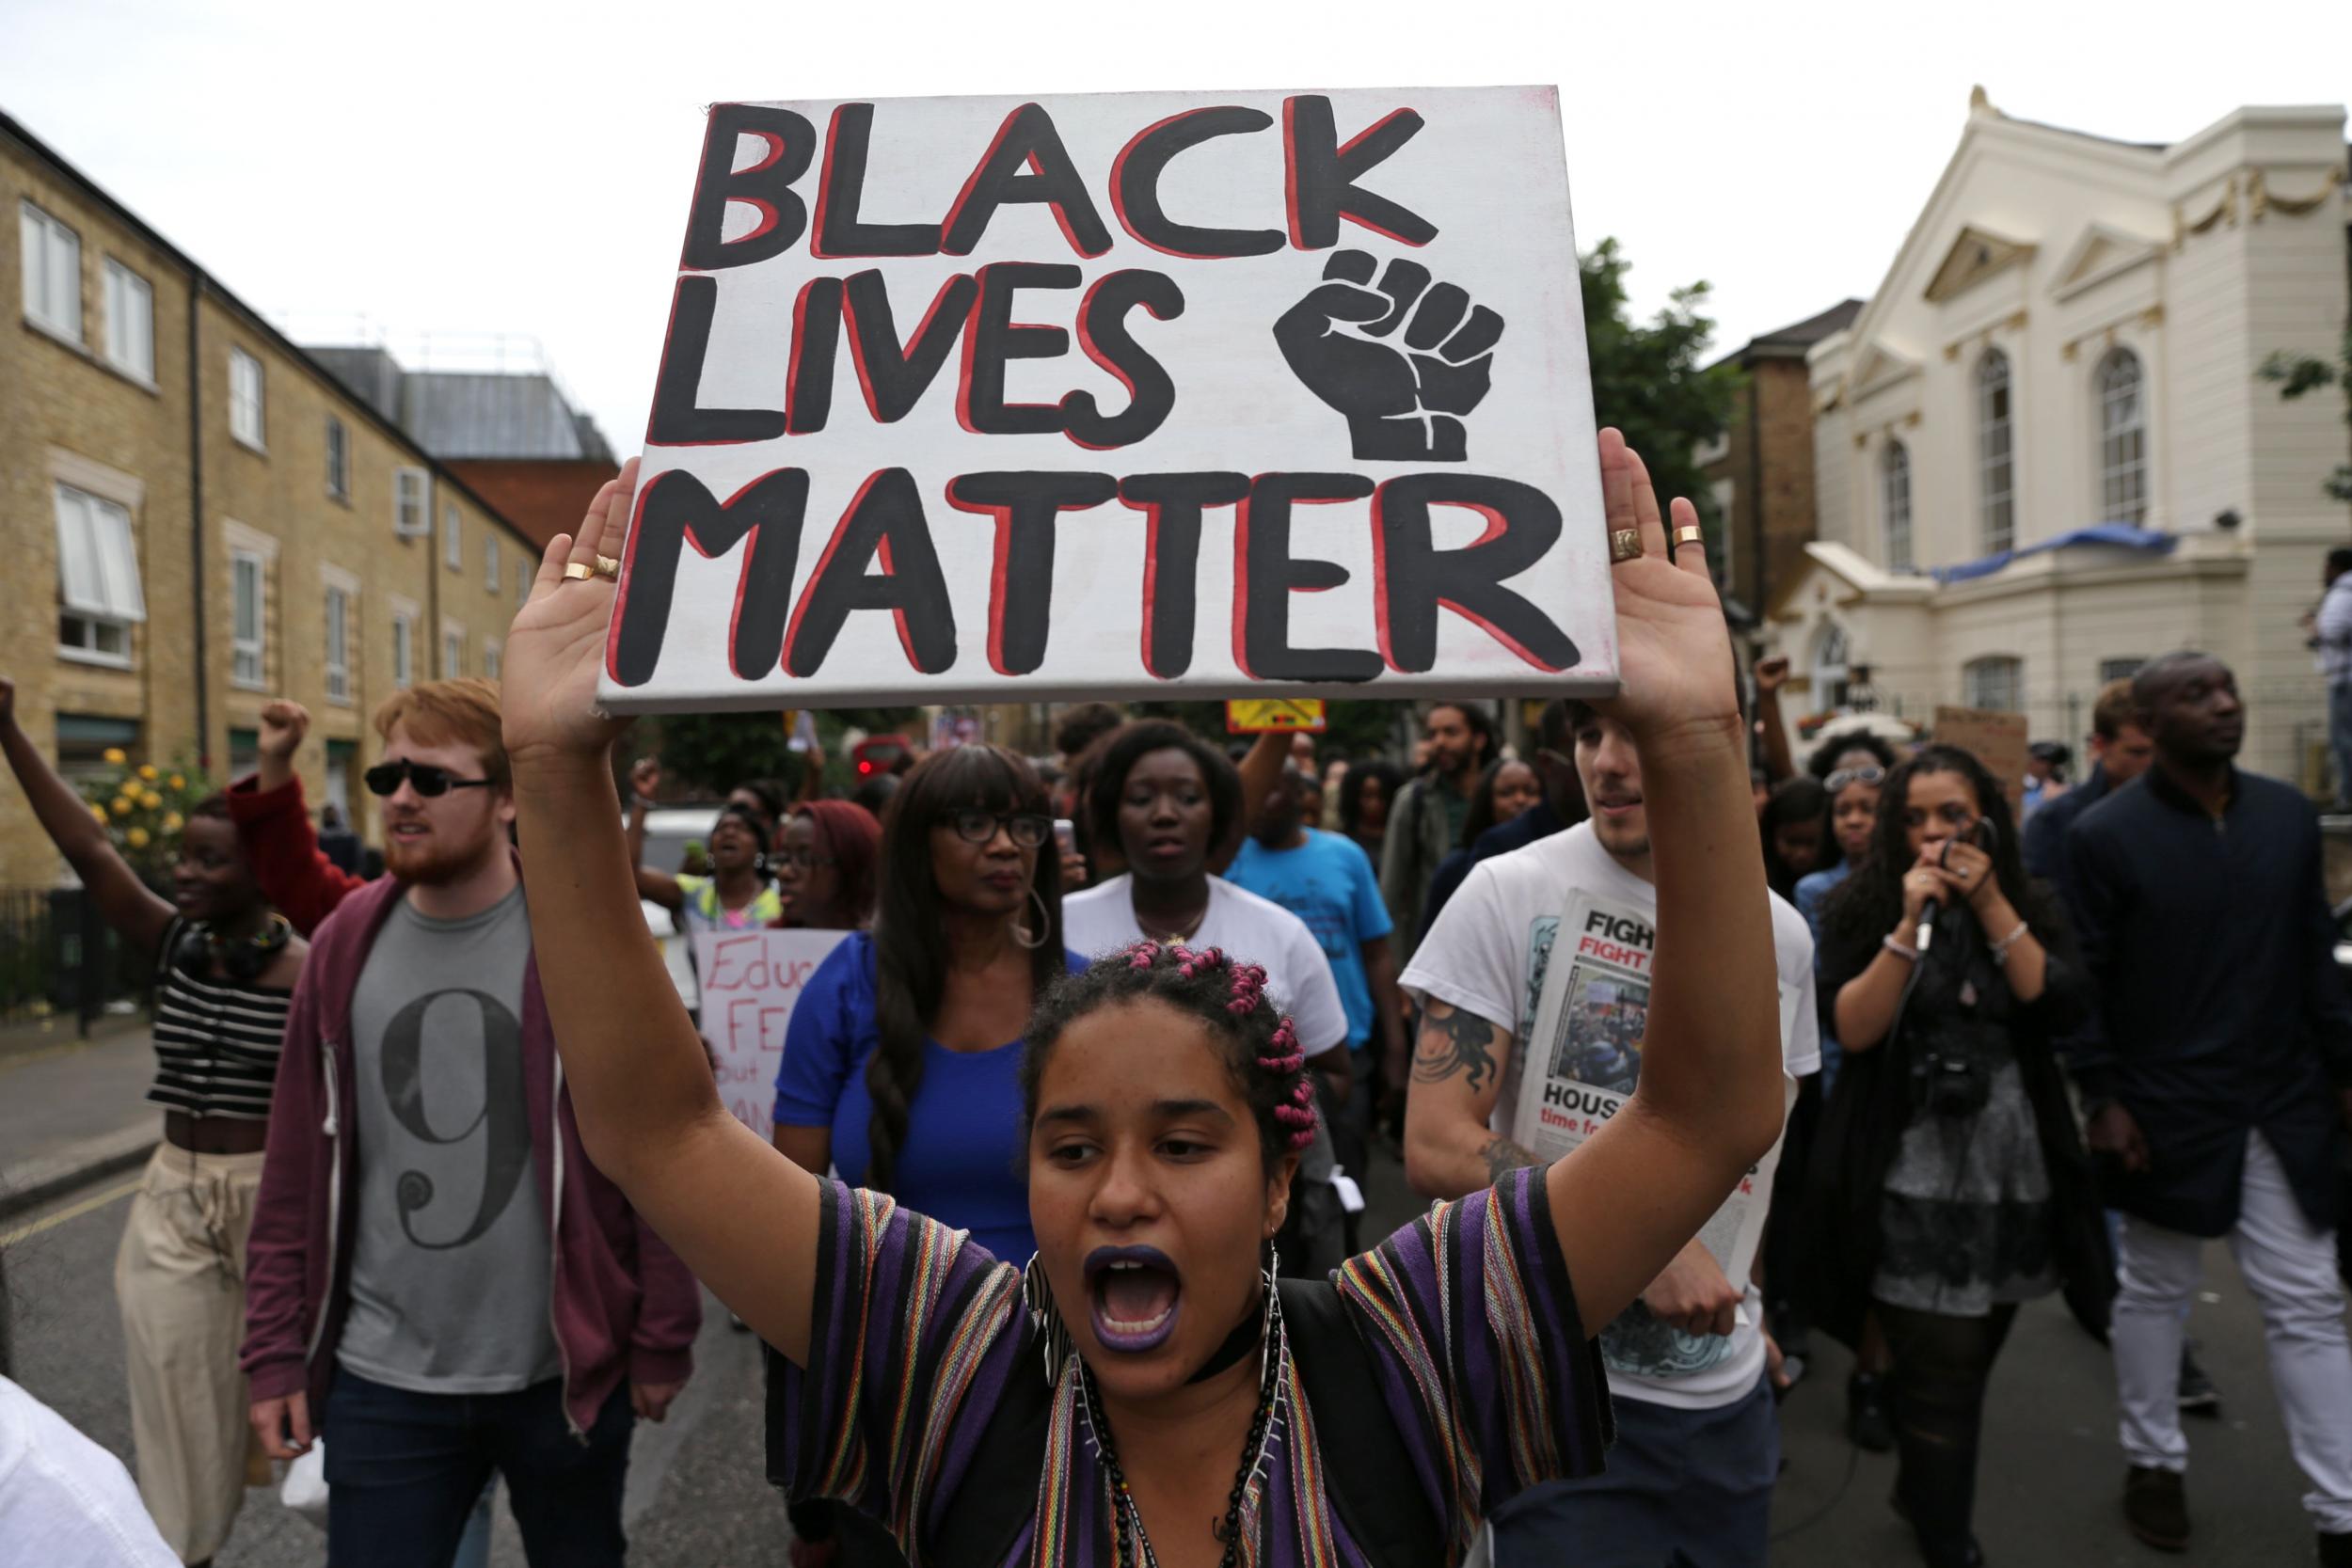 The Black Lives Matter movement has taken off across the world in response to the perceived treatment of black people by police